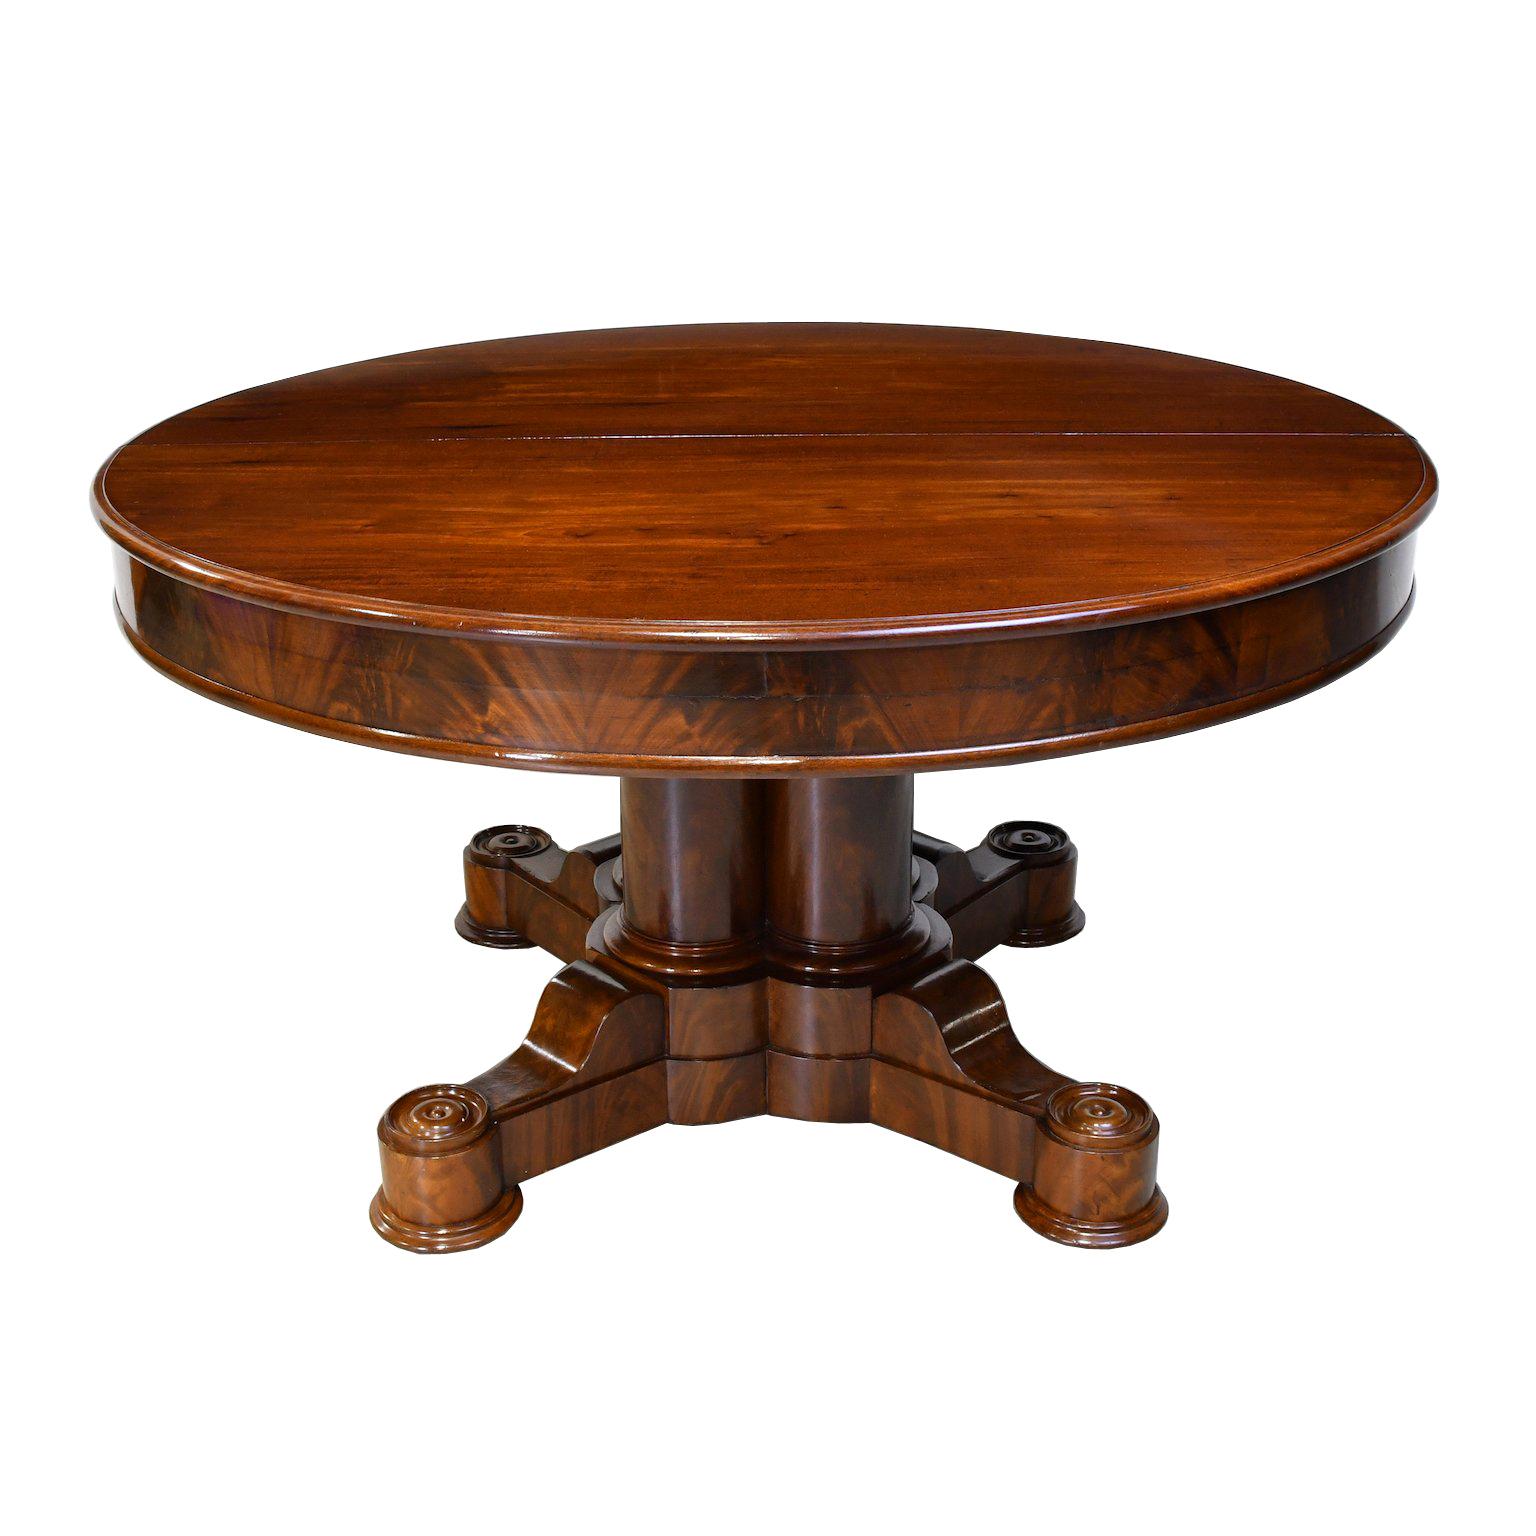 American Empire Oval Extension Dining Table in Mahogany with Pedestal Base